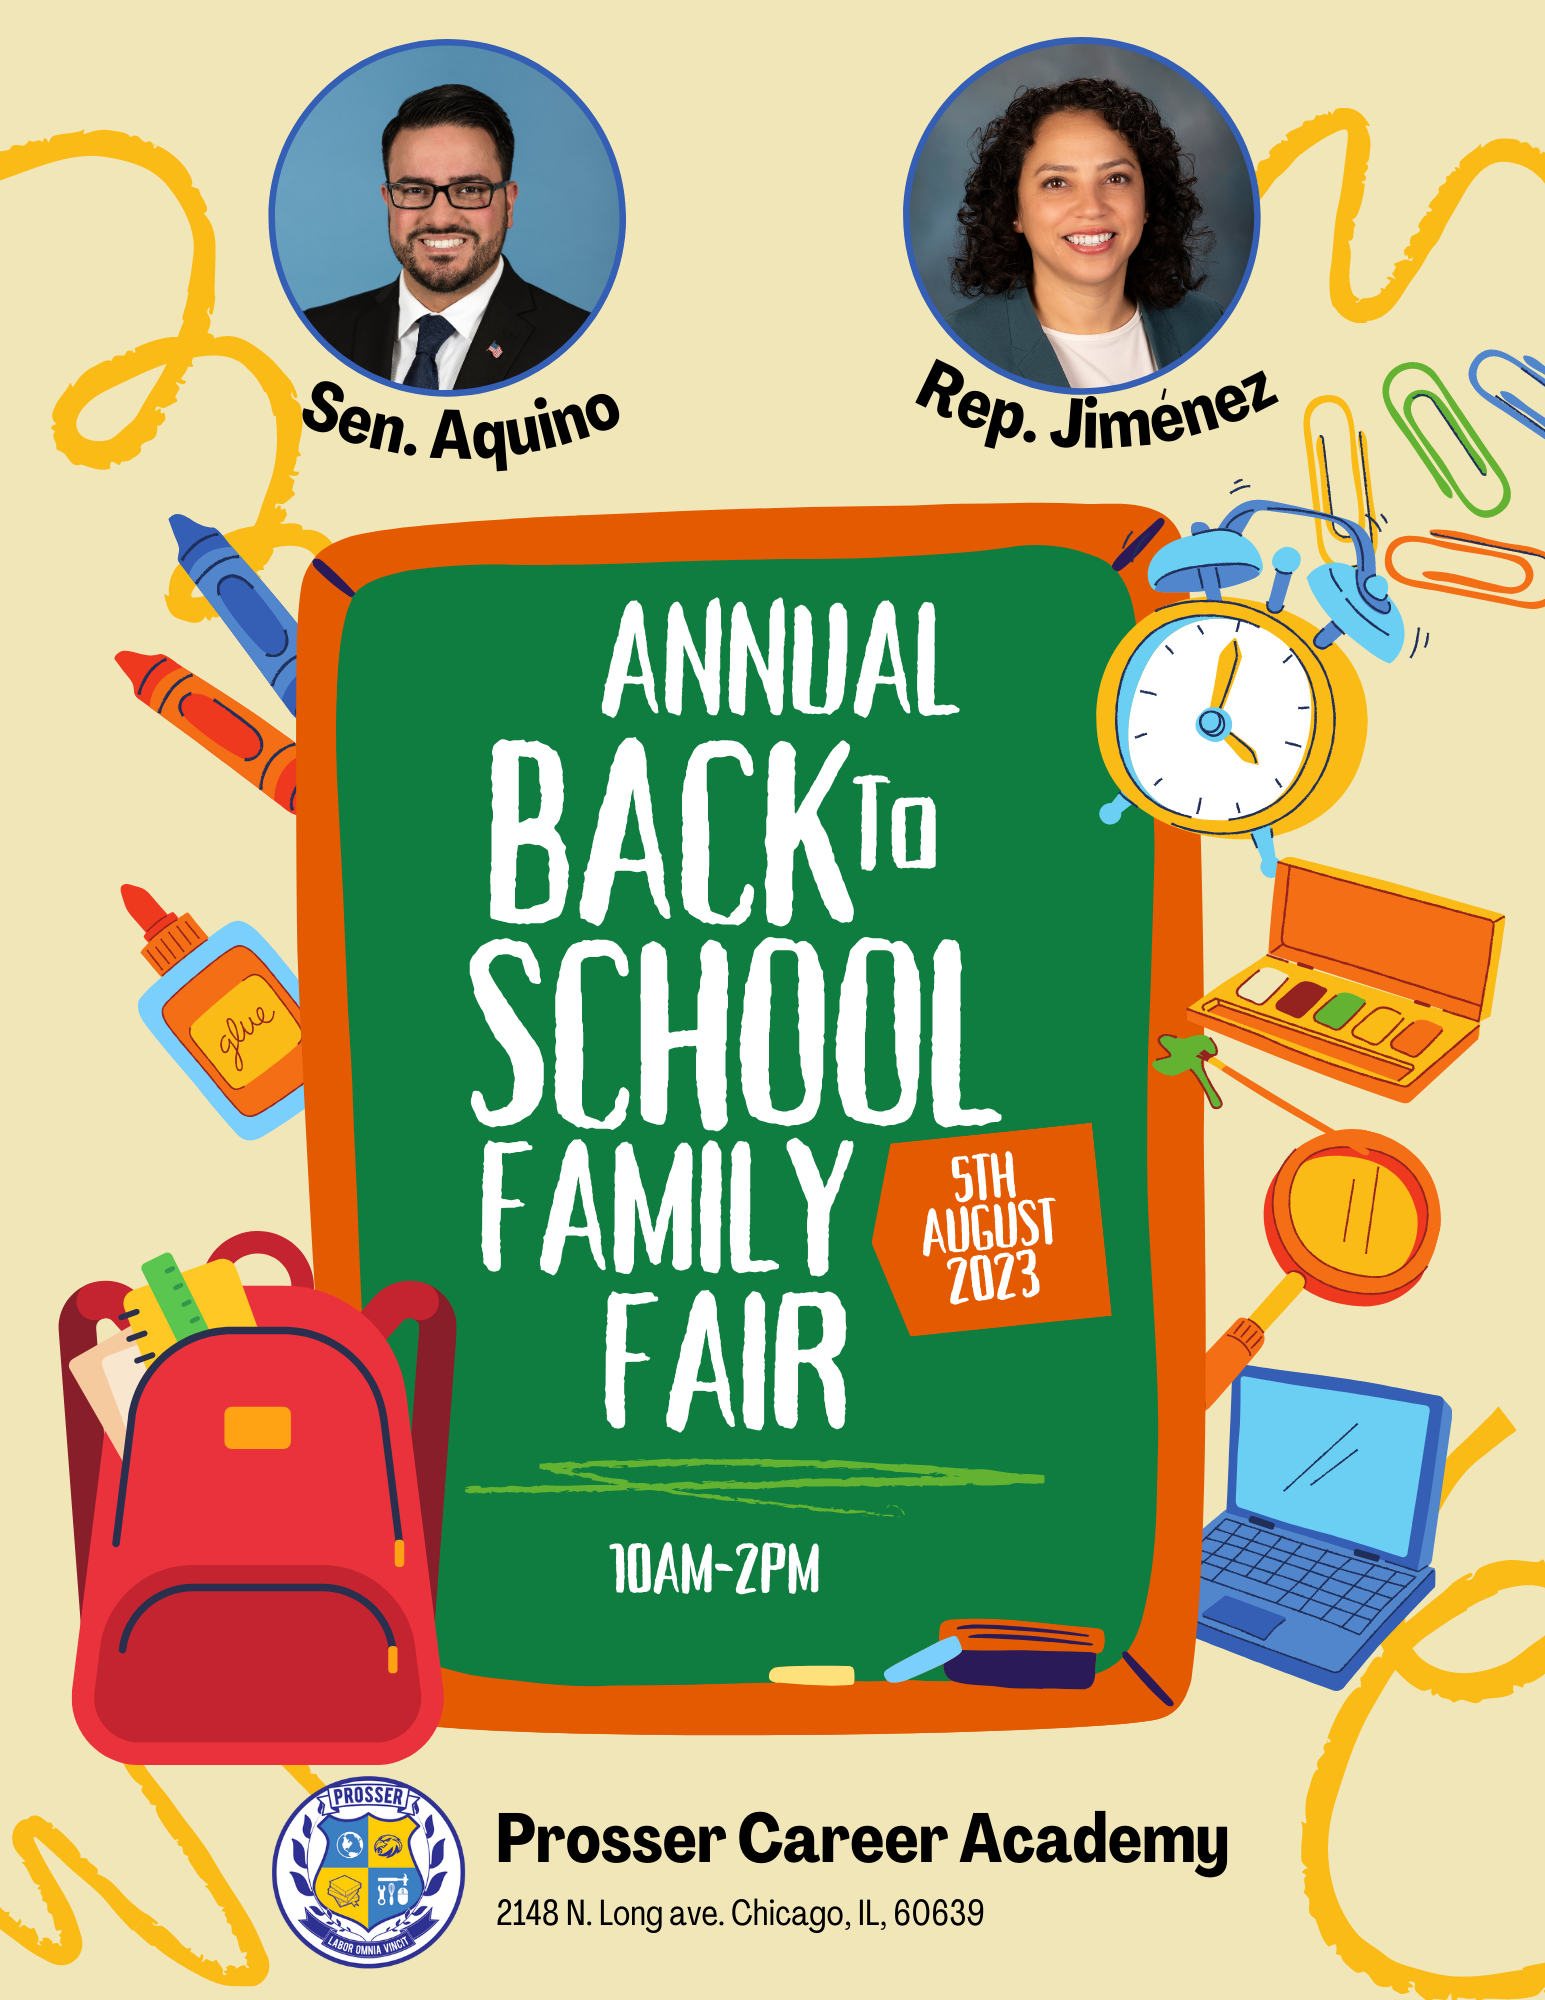 At the top, the image of Senator Aquino and Representative Jiménez. In the center, there is a green board announcing the Annual Back to School Family Fair on the 5th of August, 2023, from 10:00 am to 2:00 pm. Below there is the emblem and name of Prosser Career Academy, with the address 2148 N. Long Ave. Chicago, IL., 60639. In the background, there are animations of school materials: a backpack, crayons, glue, laptops, and a clock.